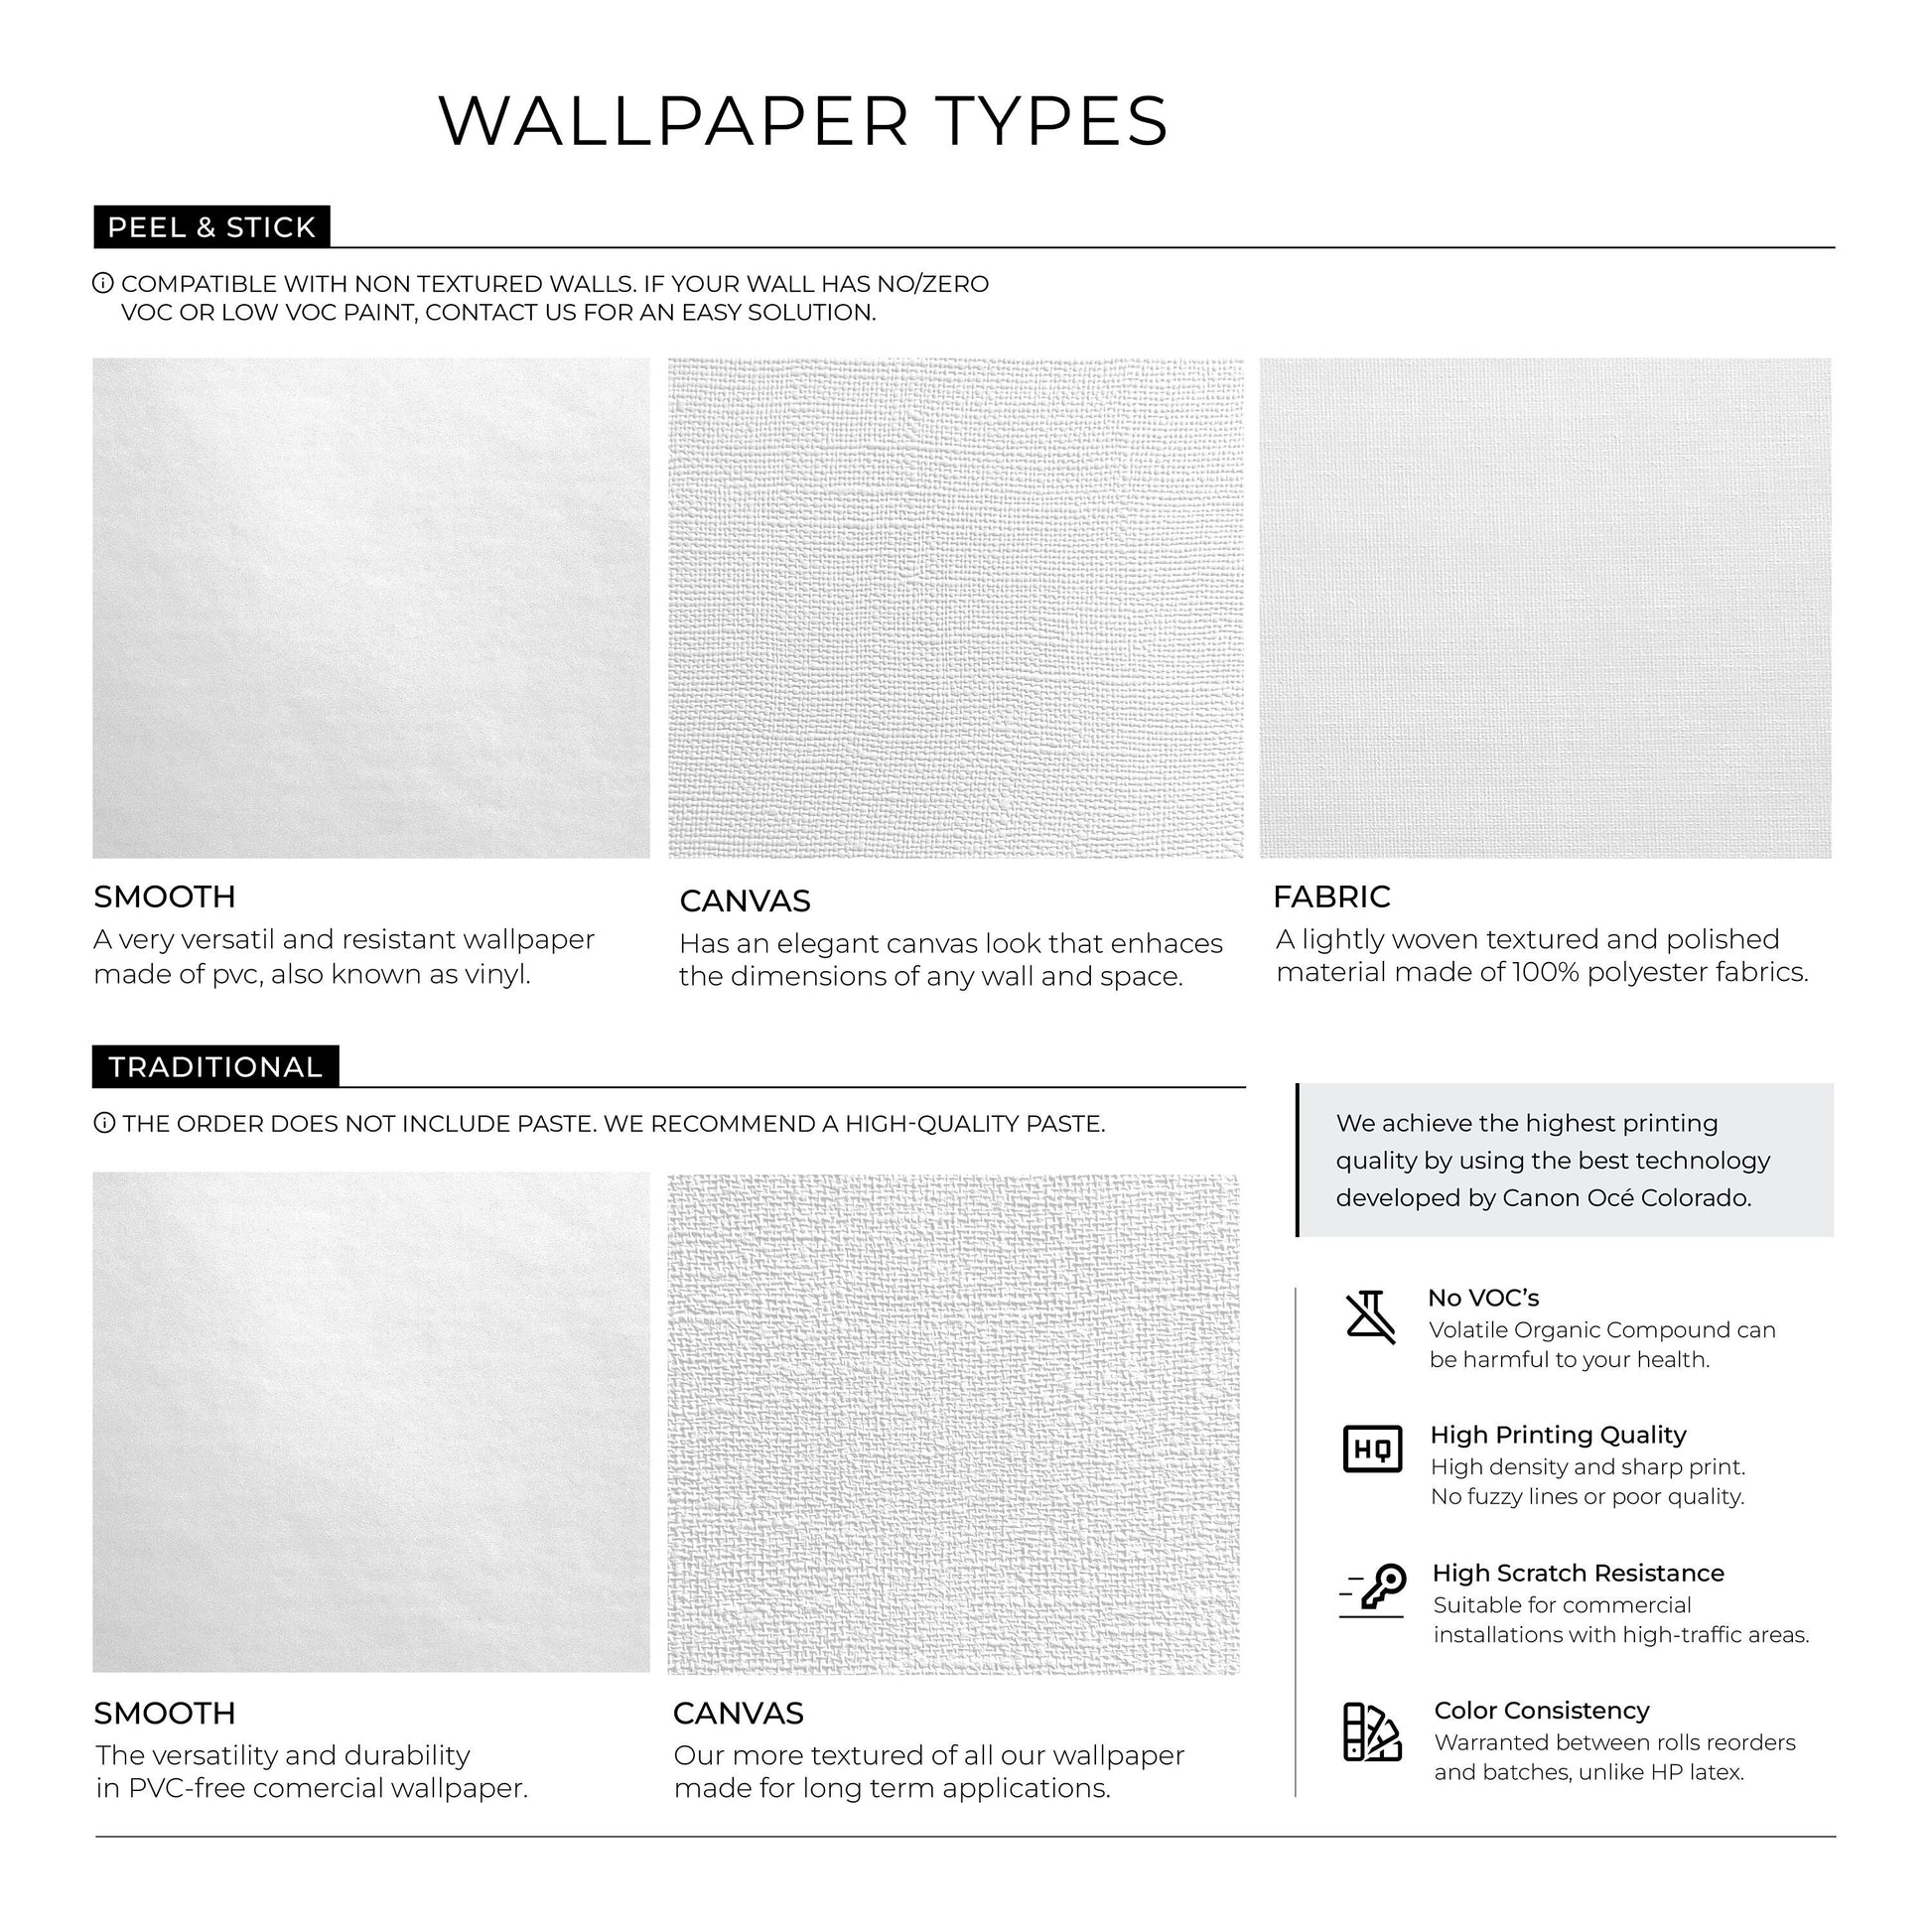 Removable Wallpaper Wall Temporary Wallpaper Wall Decor Wall Paper Removable Peel and Stick Wallpaper - B030